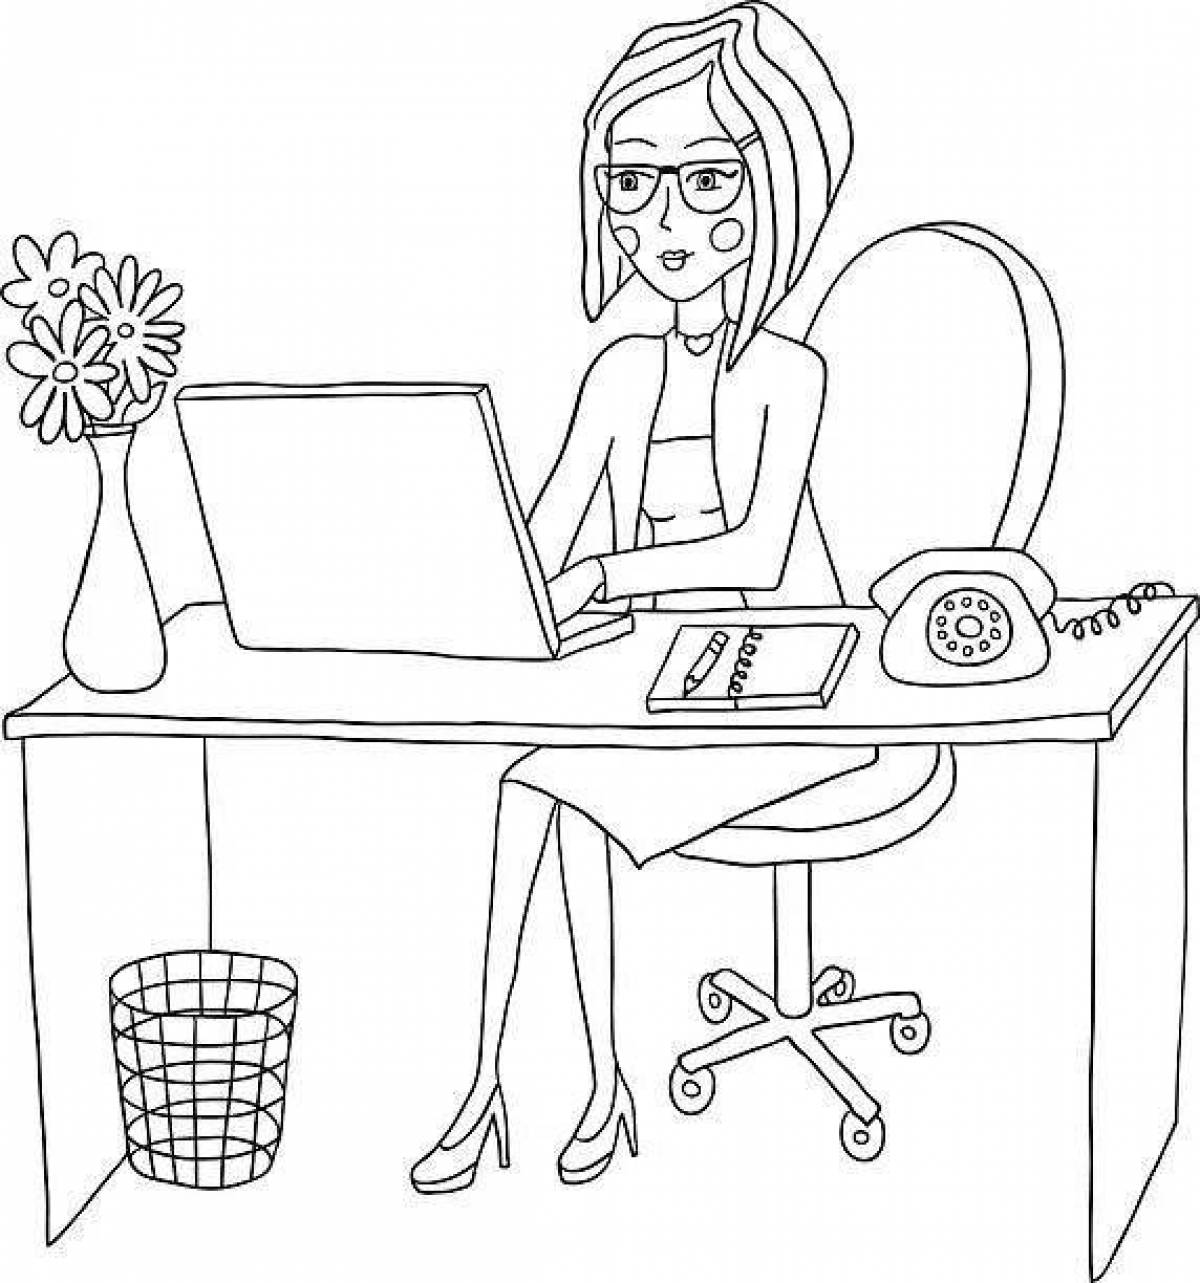 Color-frenzy office coloring page